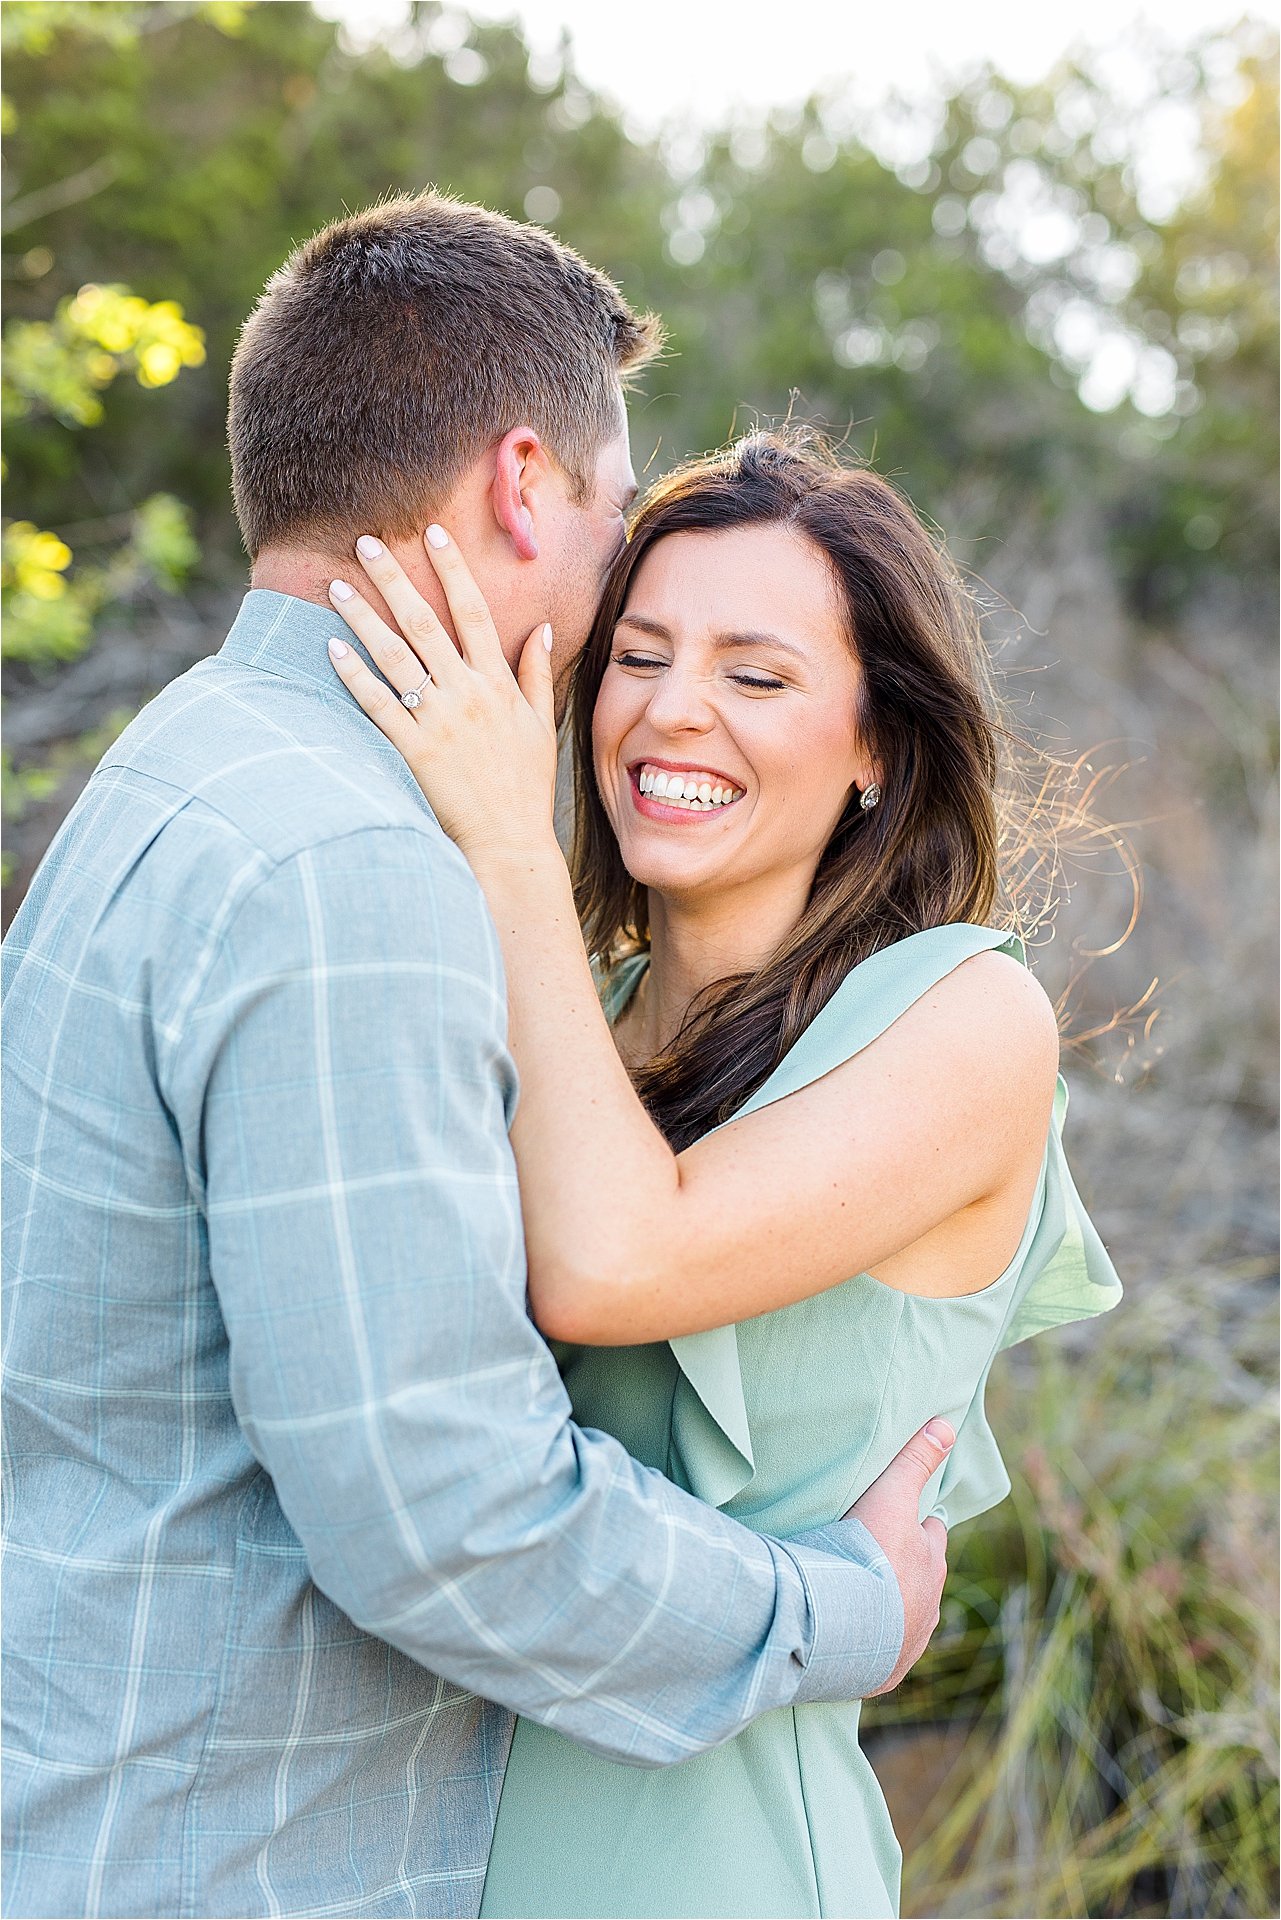 A fiance whispers something funny during their Pedernales State Park Engagement Session with Austin Wedding Photographer Jillian Hogan 